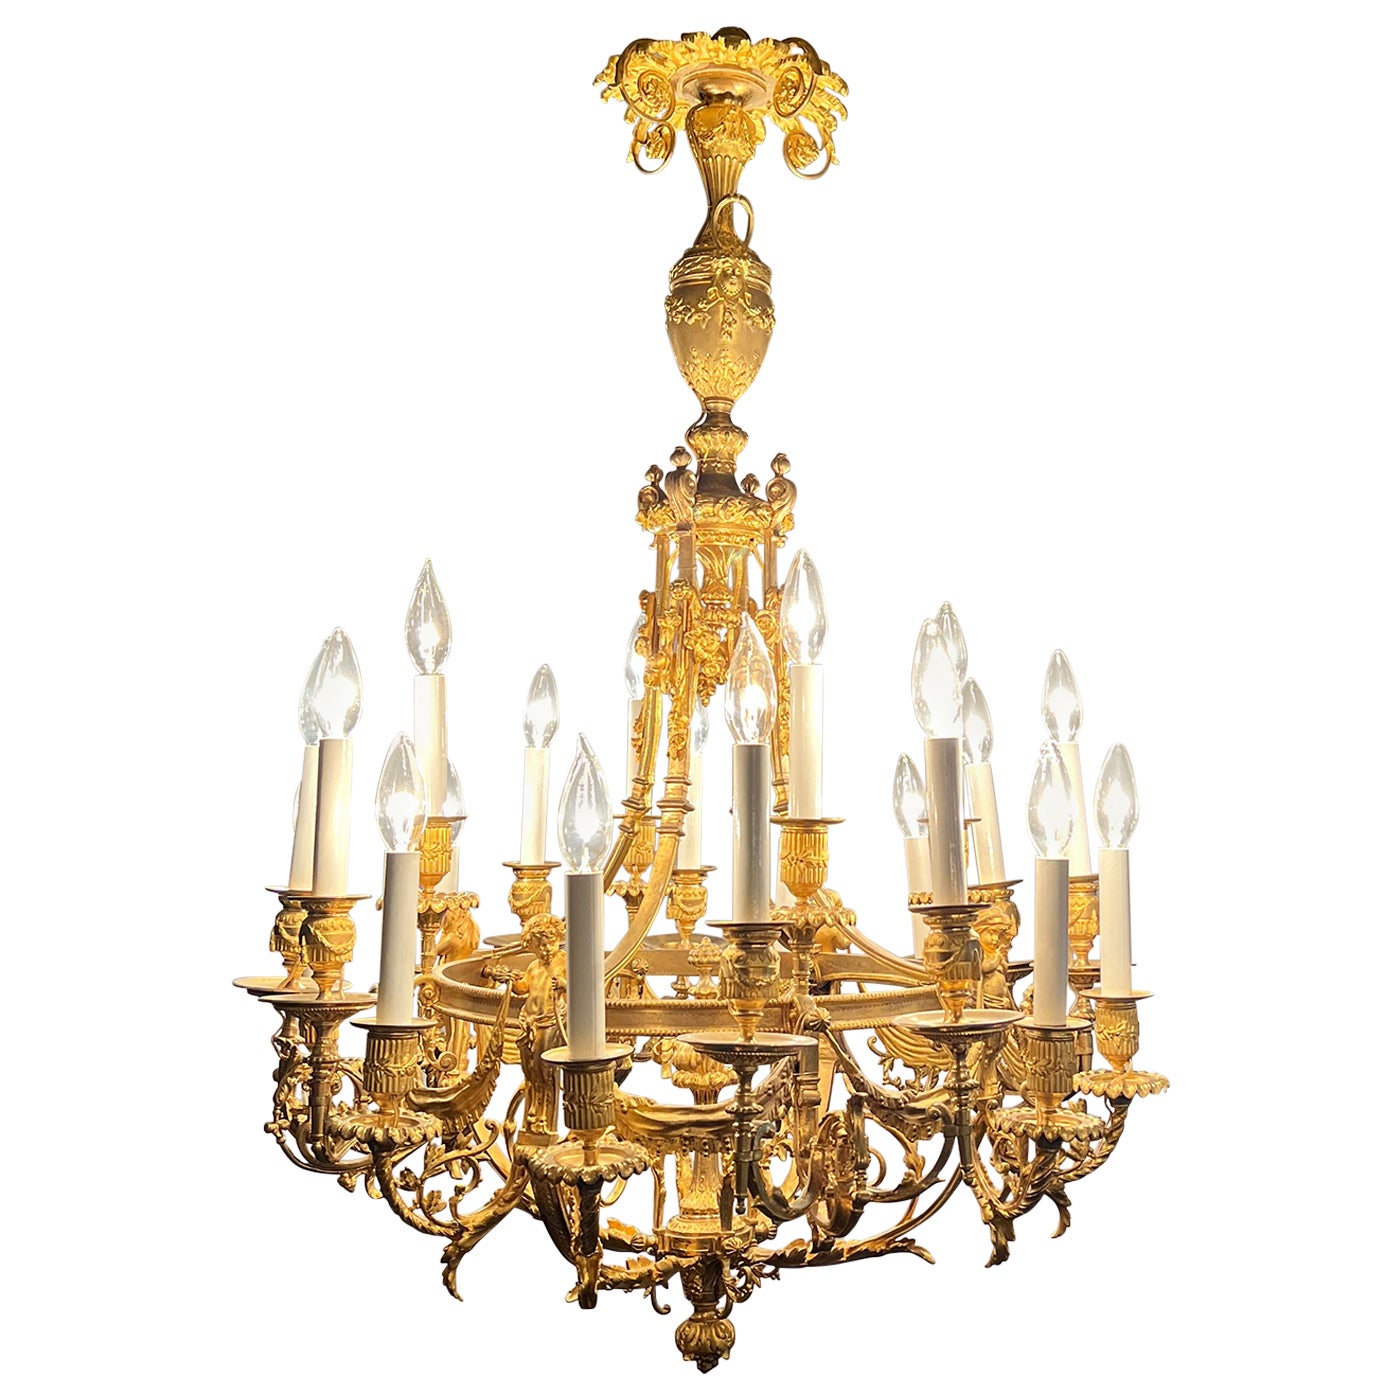 Antique French Finely Chased Bronze D'Ore 20 Light Chandelier, Circa 1870-1880. For Sale